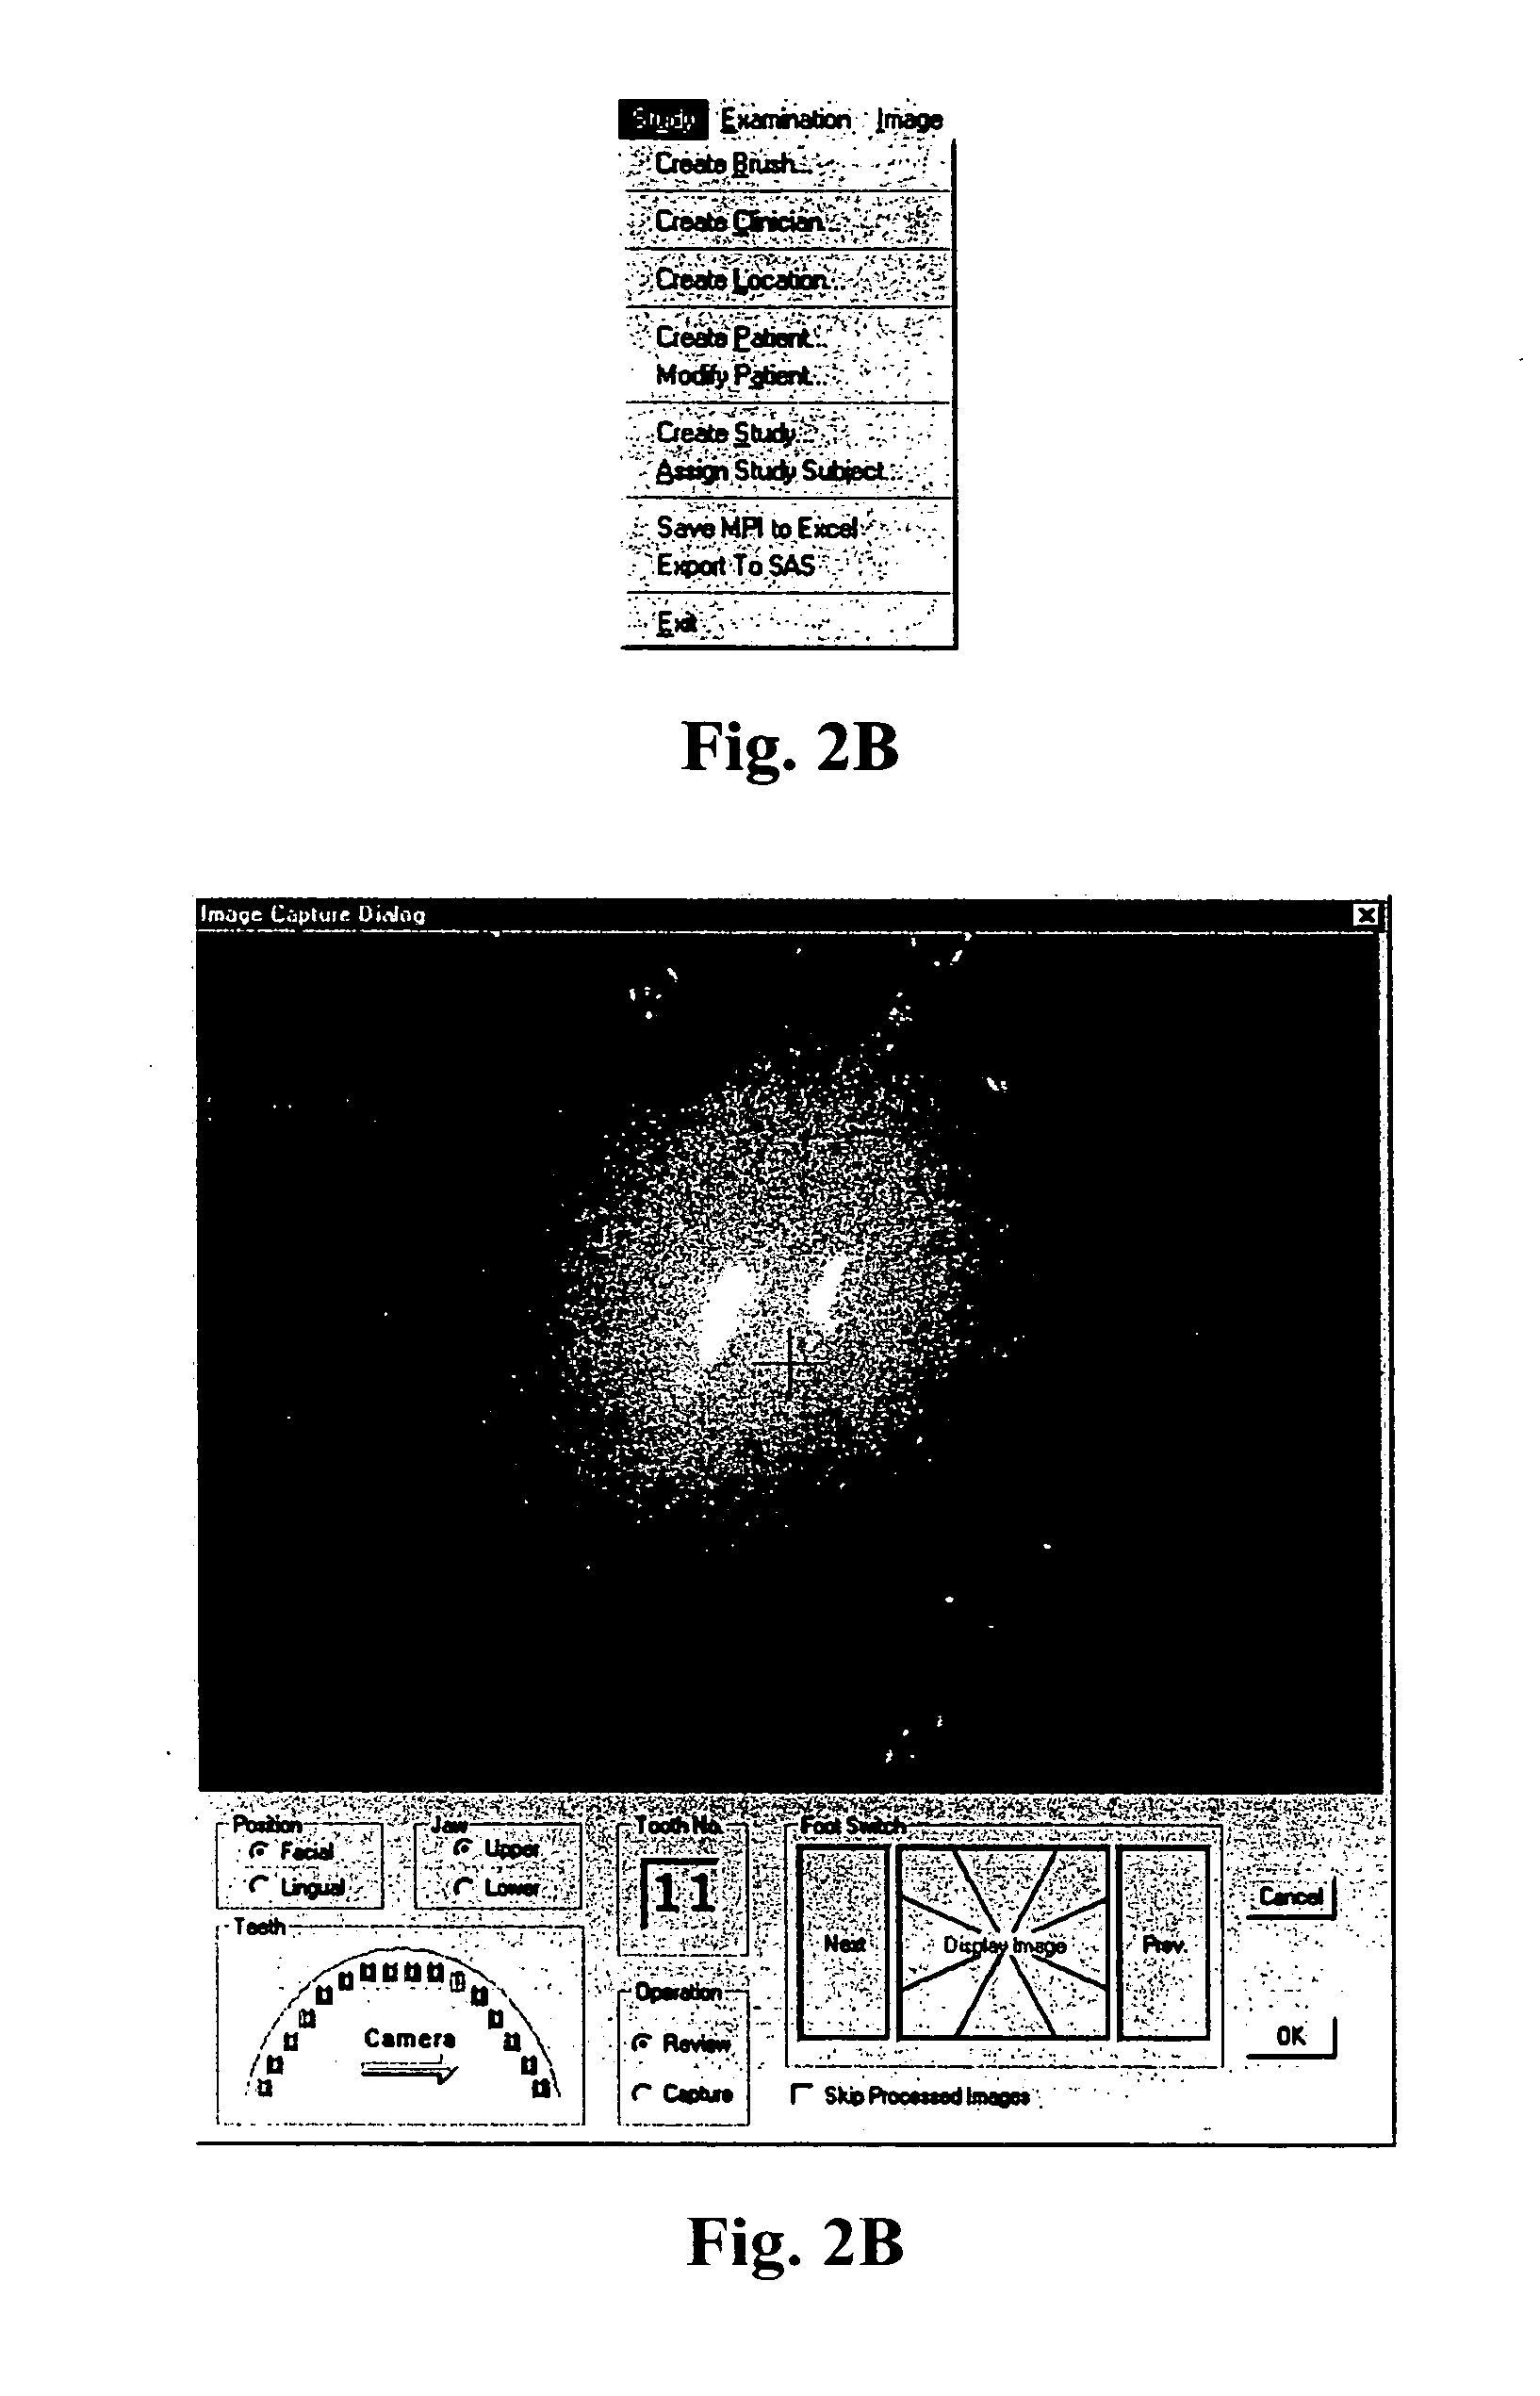 Computer-implemented system and method for automated and highly accurate plaque analysis, reporting, and visualization